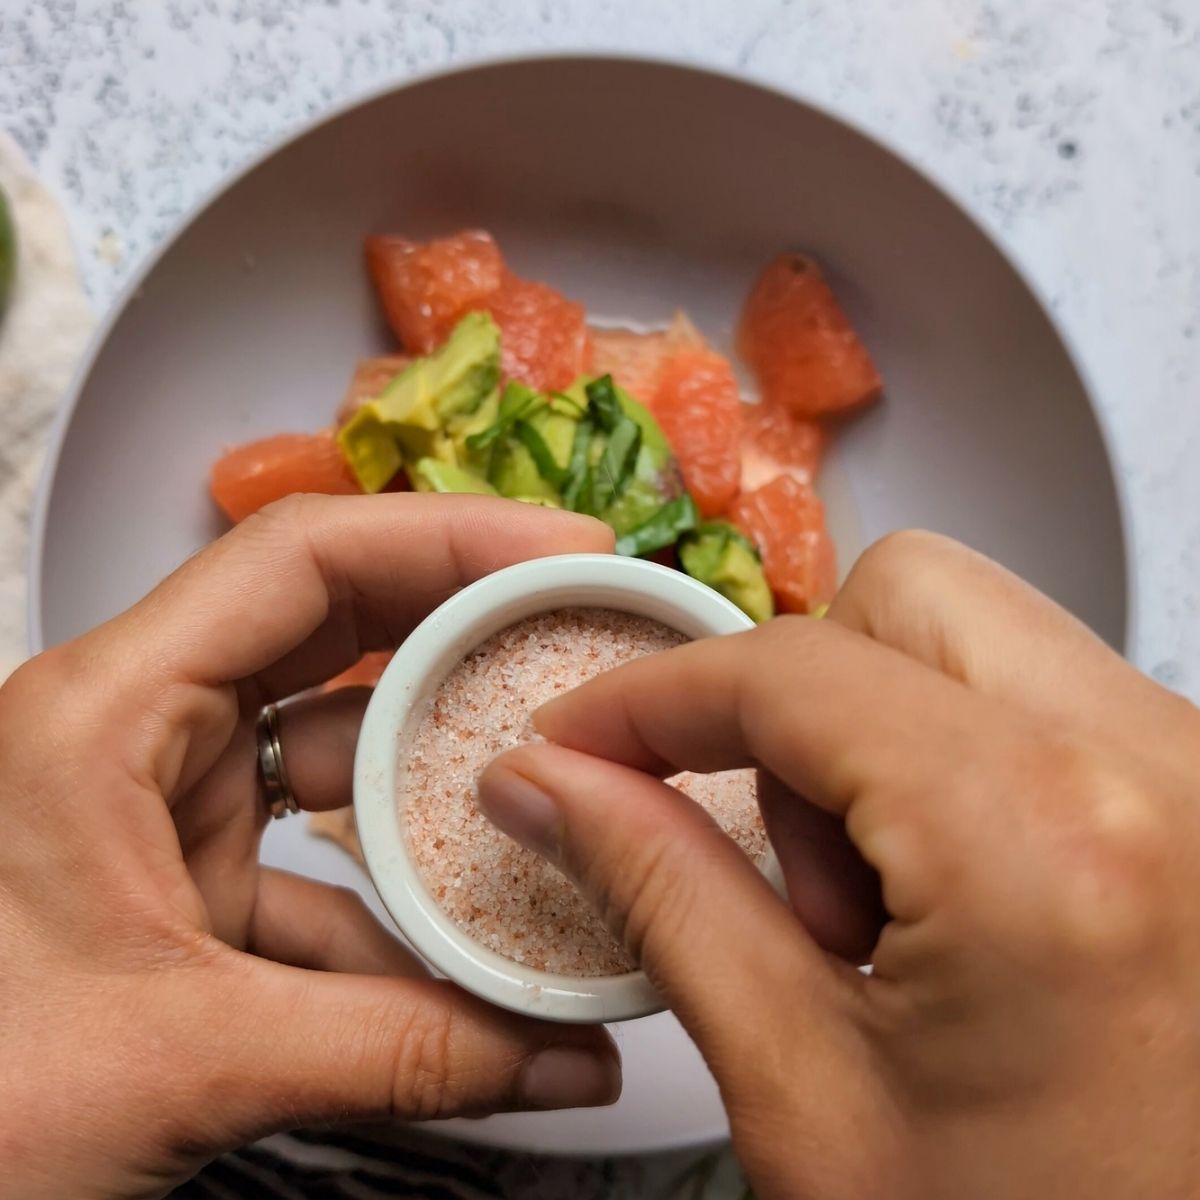 hands adding a pinch of salt over the grapefruit and avocado salad in a bowl.